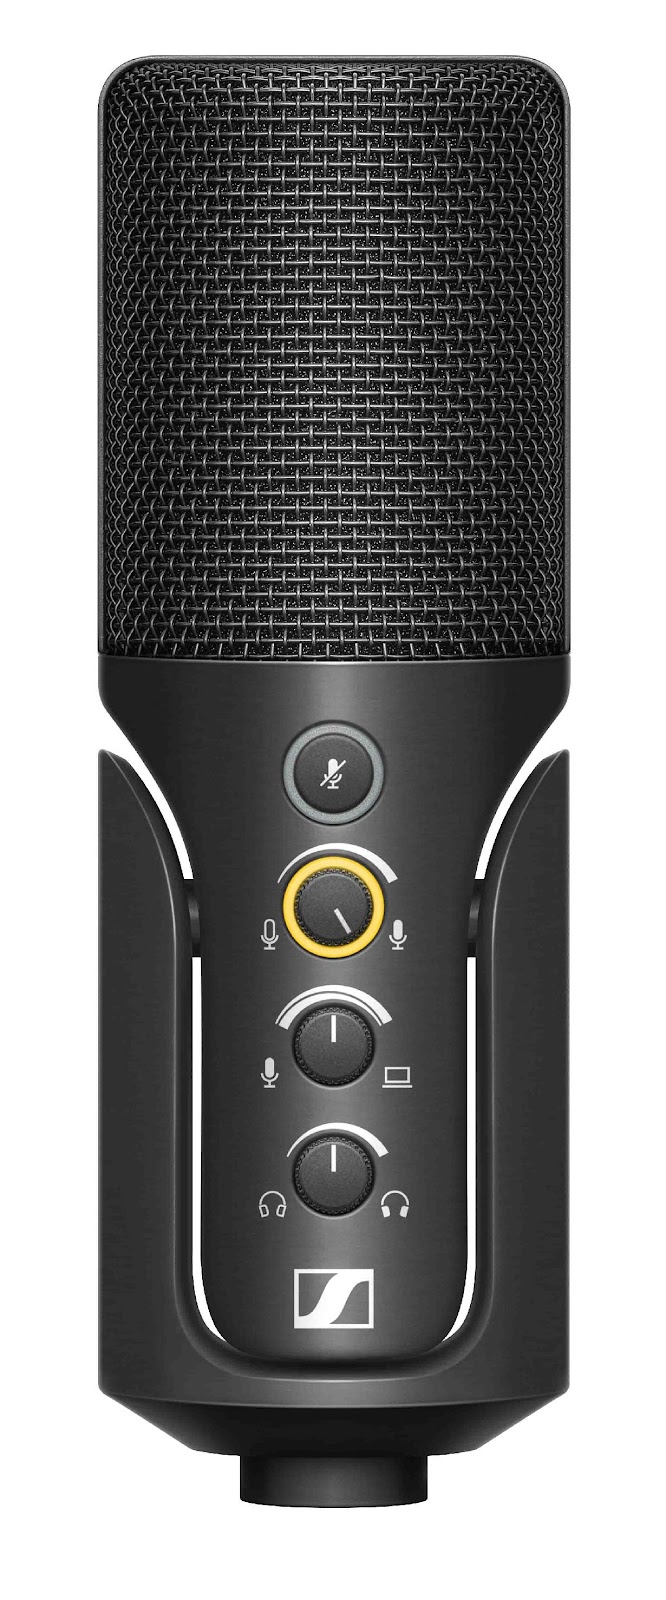 A picture containing microphone, black

Description automatically generated